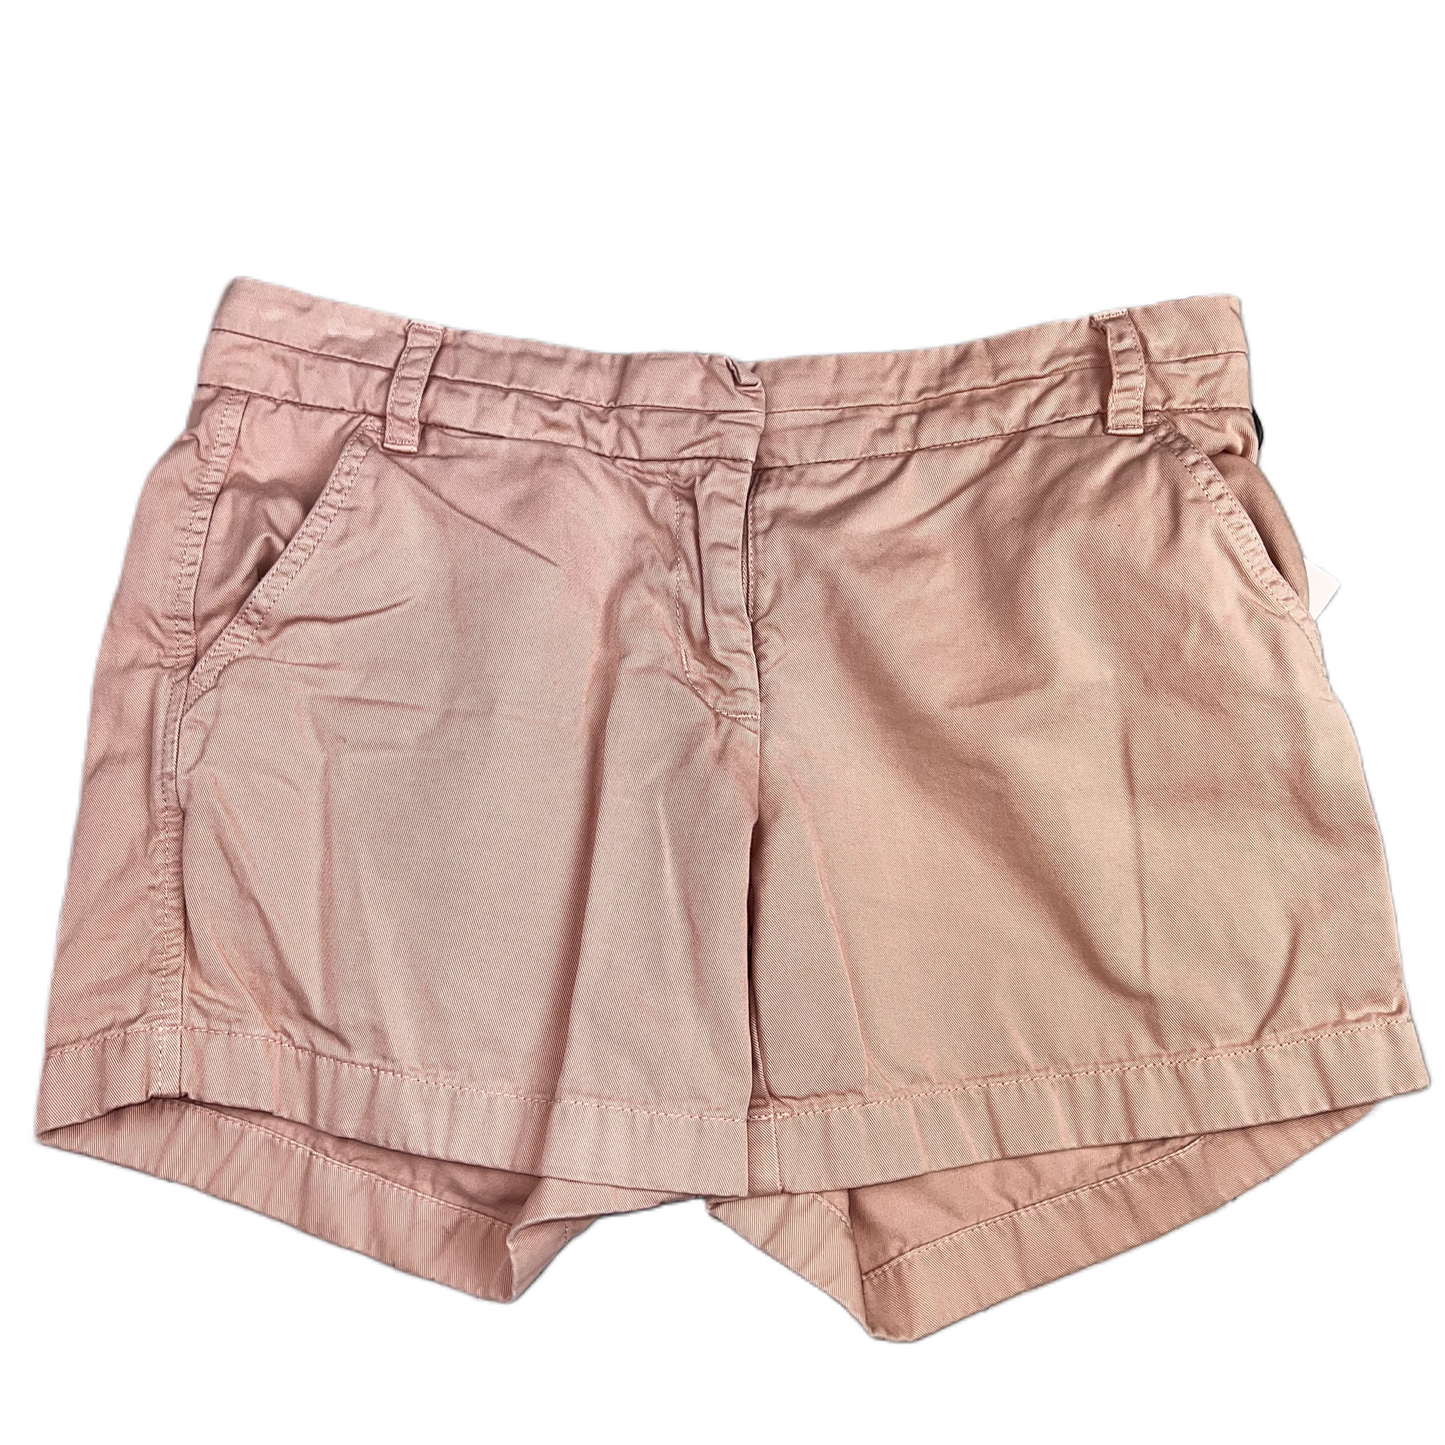 Pink Shorts By J Crew, Size: 6